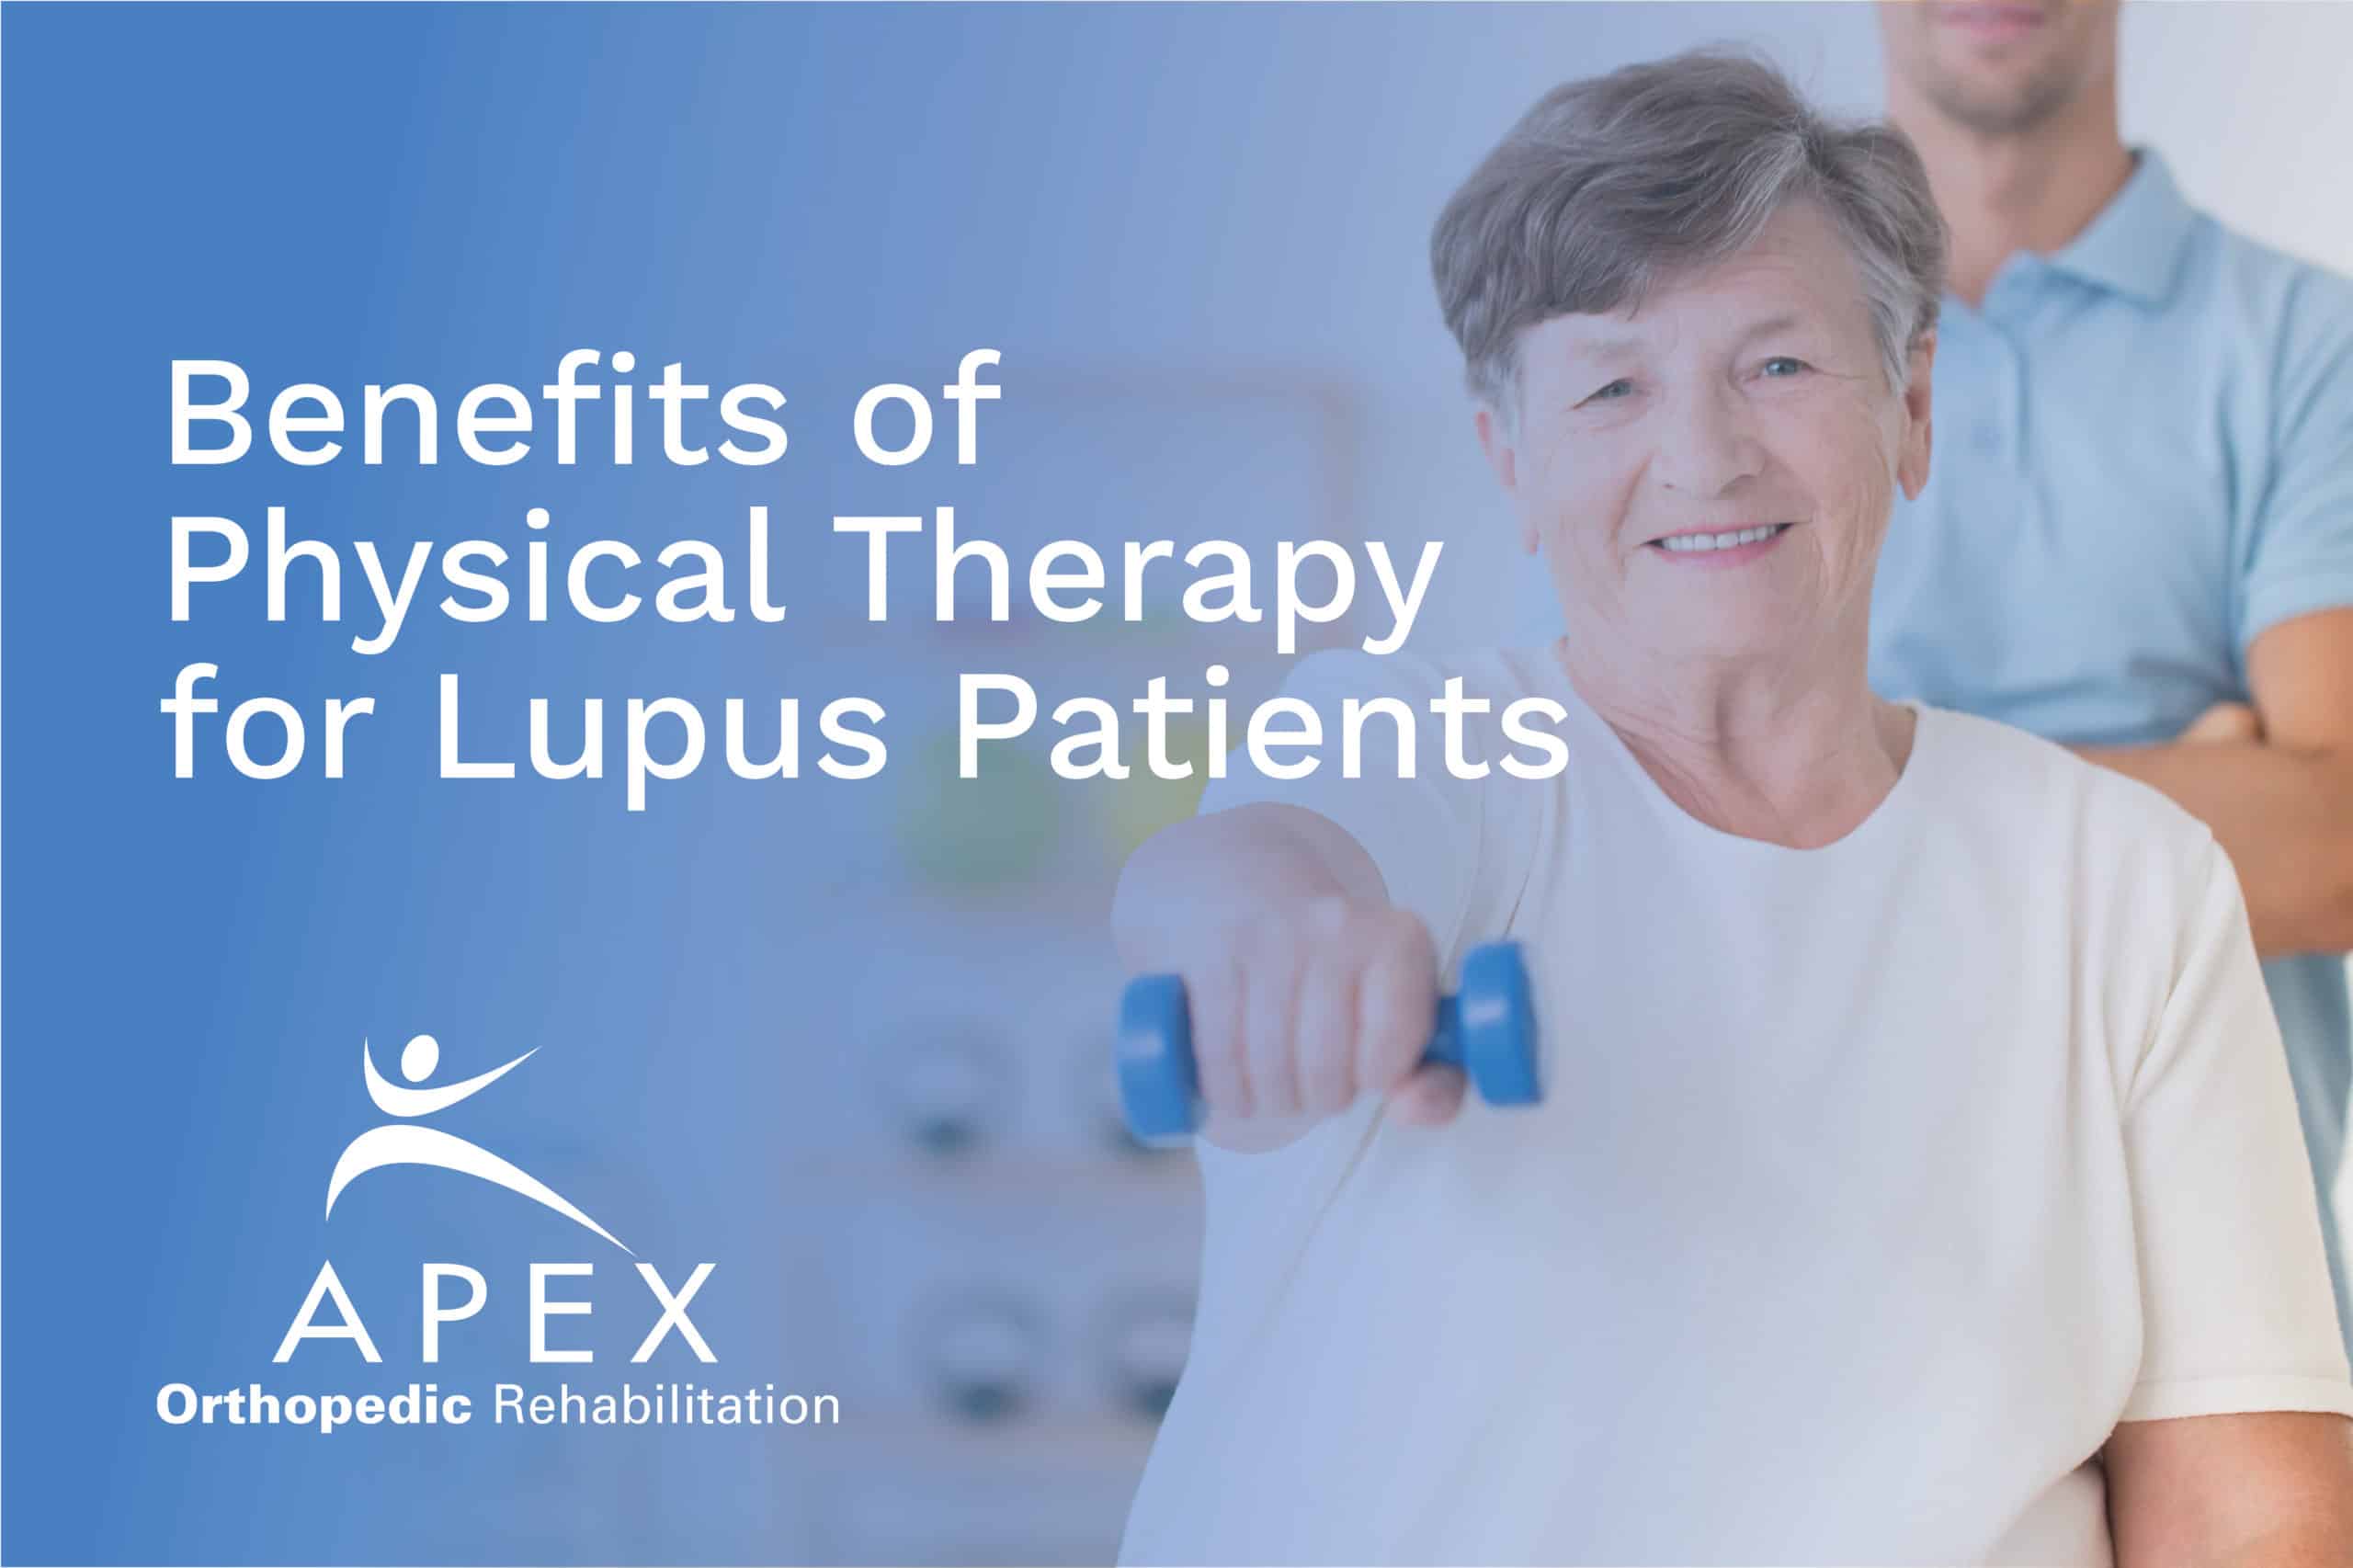 Benefits of Physical Therapy for Lupus Patients